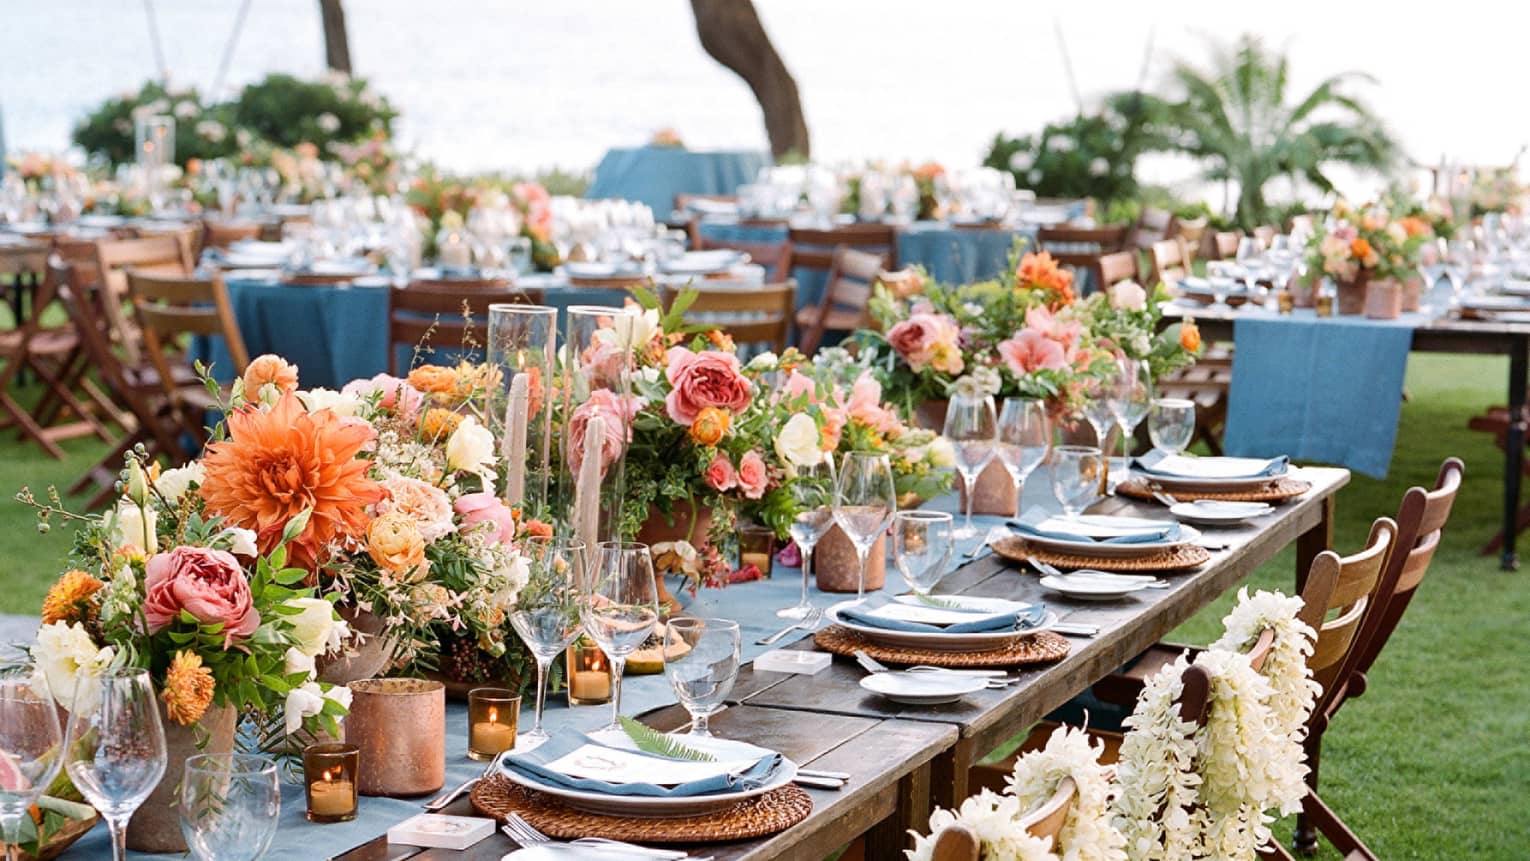 Close-up of outdoor banquet dining table with flower arrangements, white floral leis draped over chairs